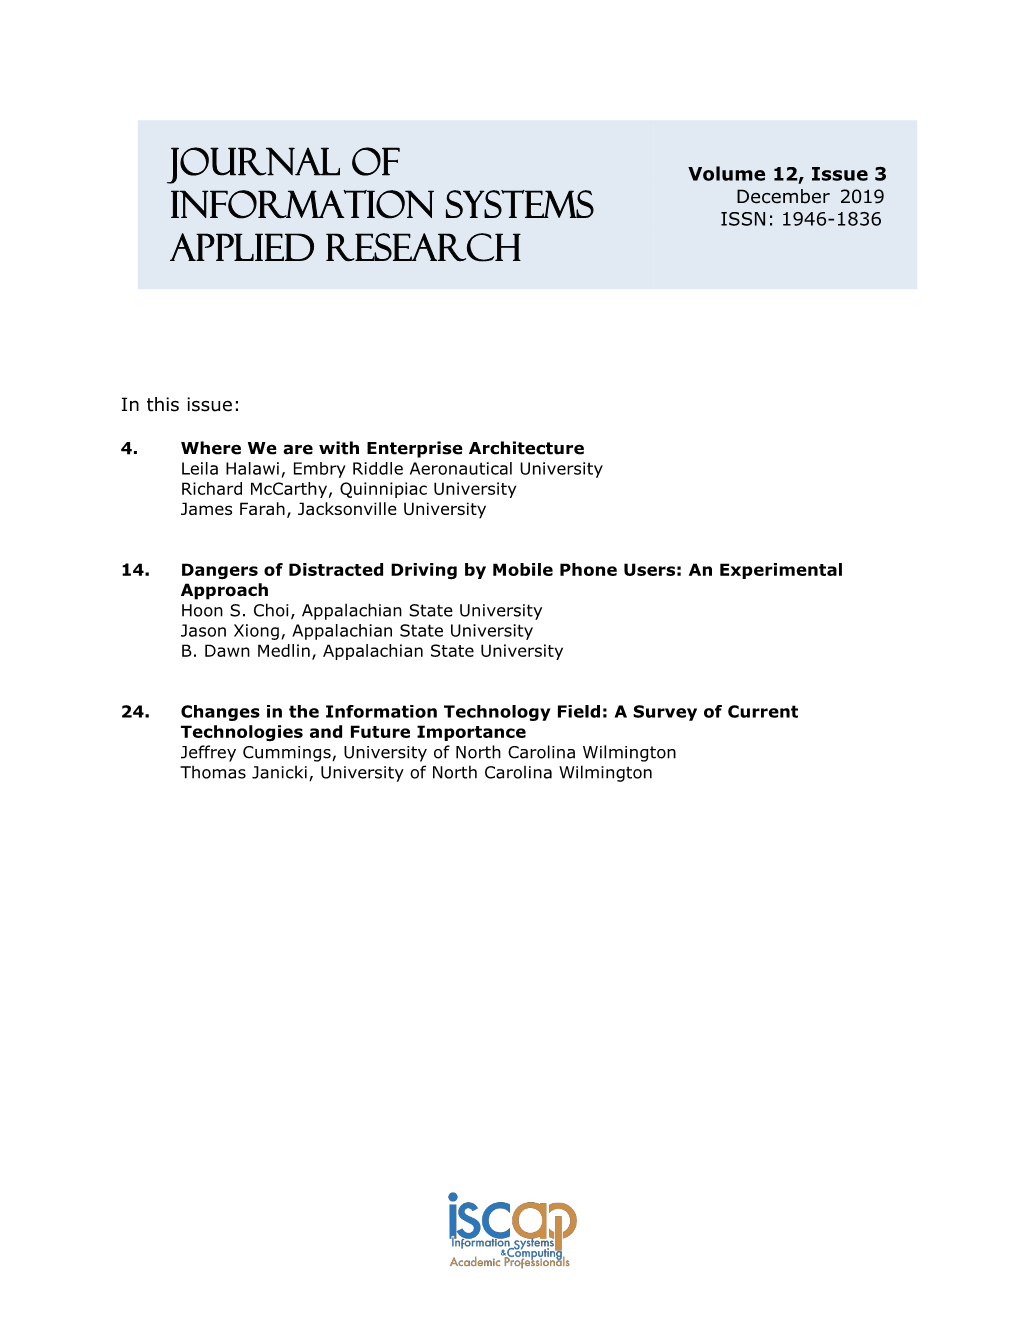 December 2019 INFORMATION SYSTEMS ISSN: 1946-1836 APPLIED RESEARCH